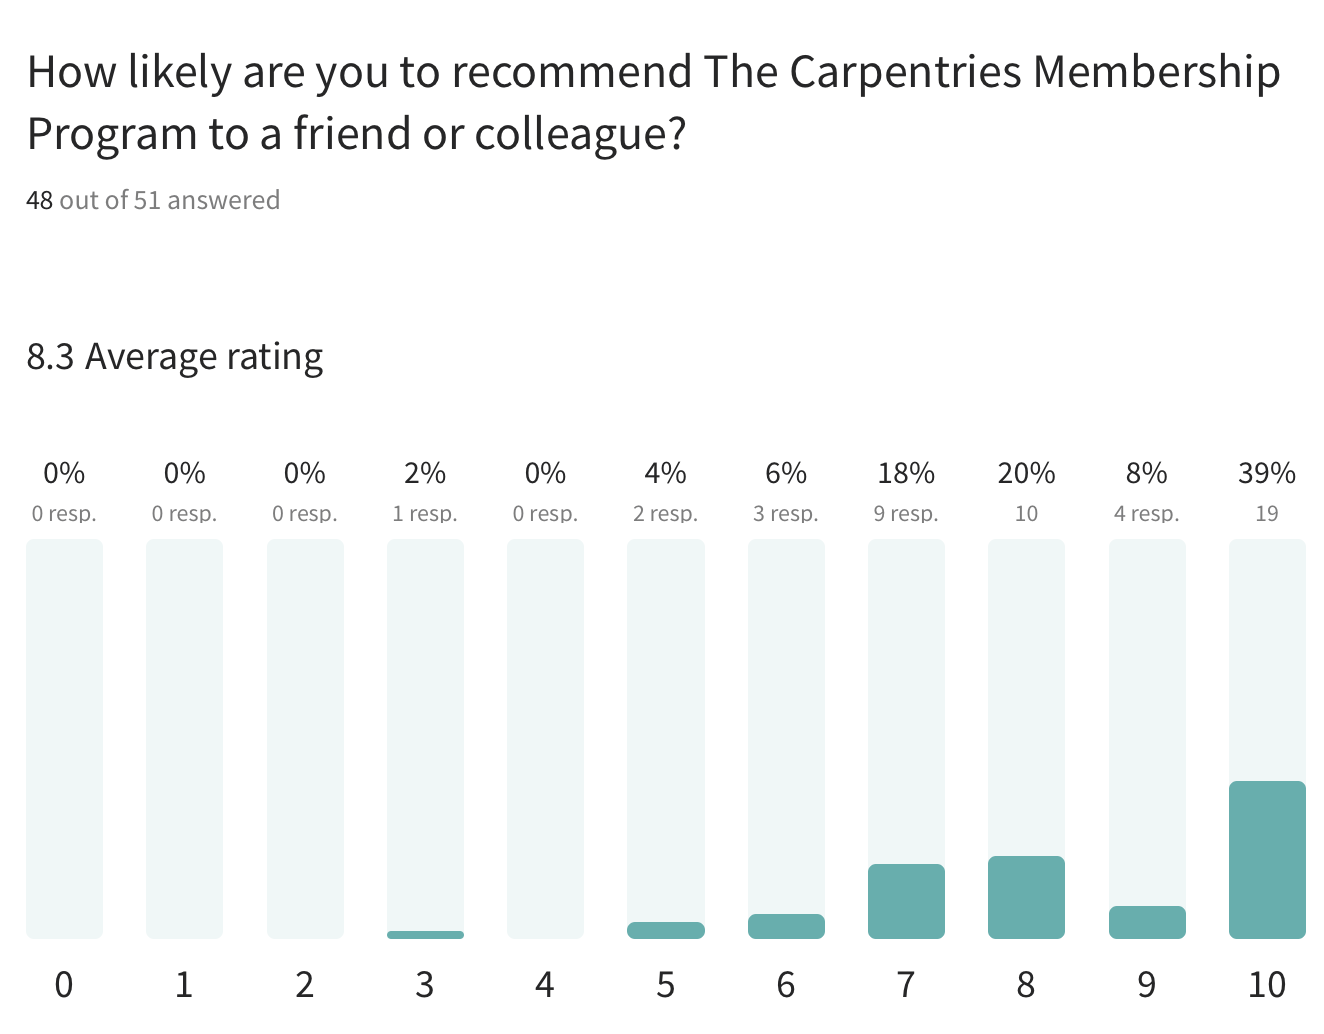 8.3 average rating under the question: How likely are you to recommend The Carpentries Membership Program to a friend or colleague?